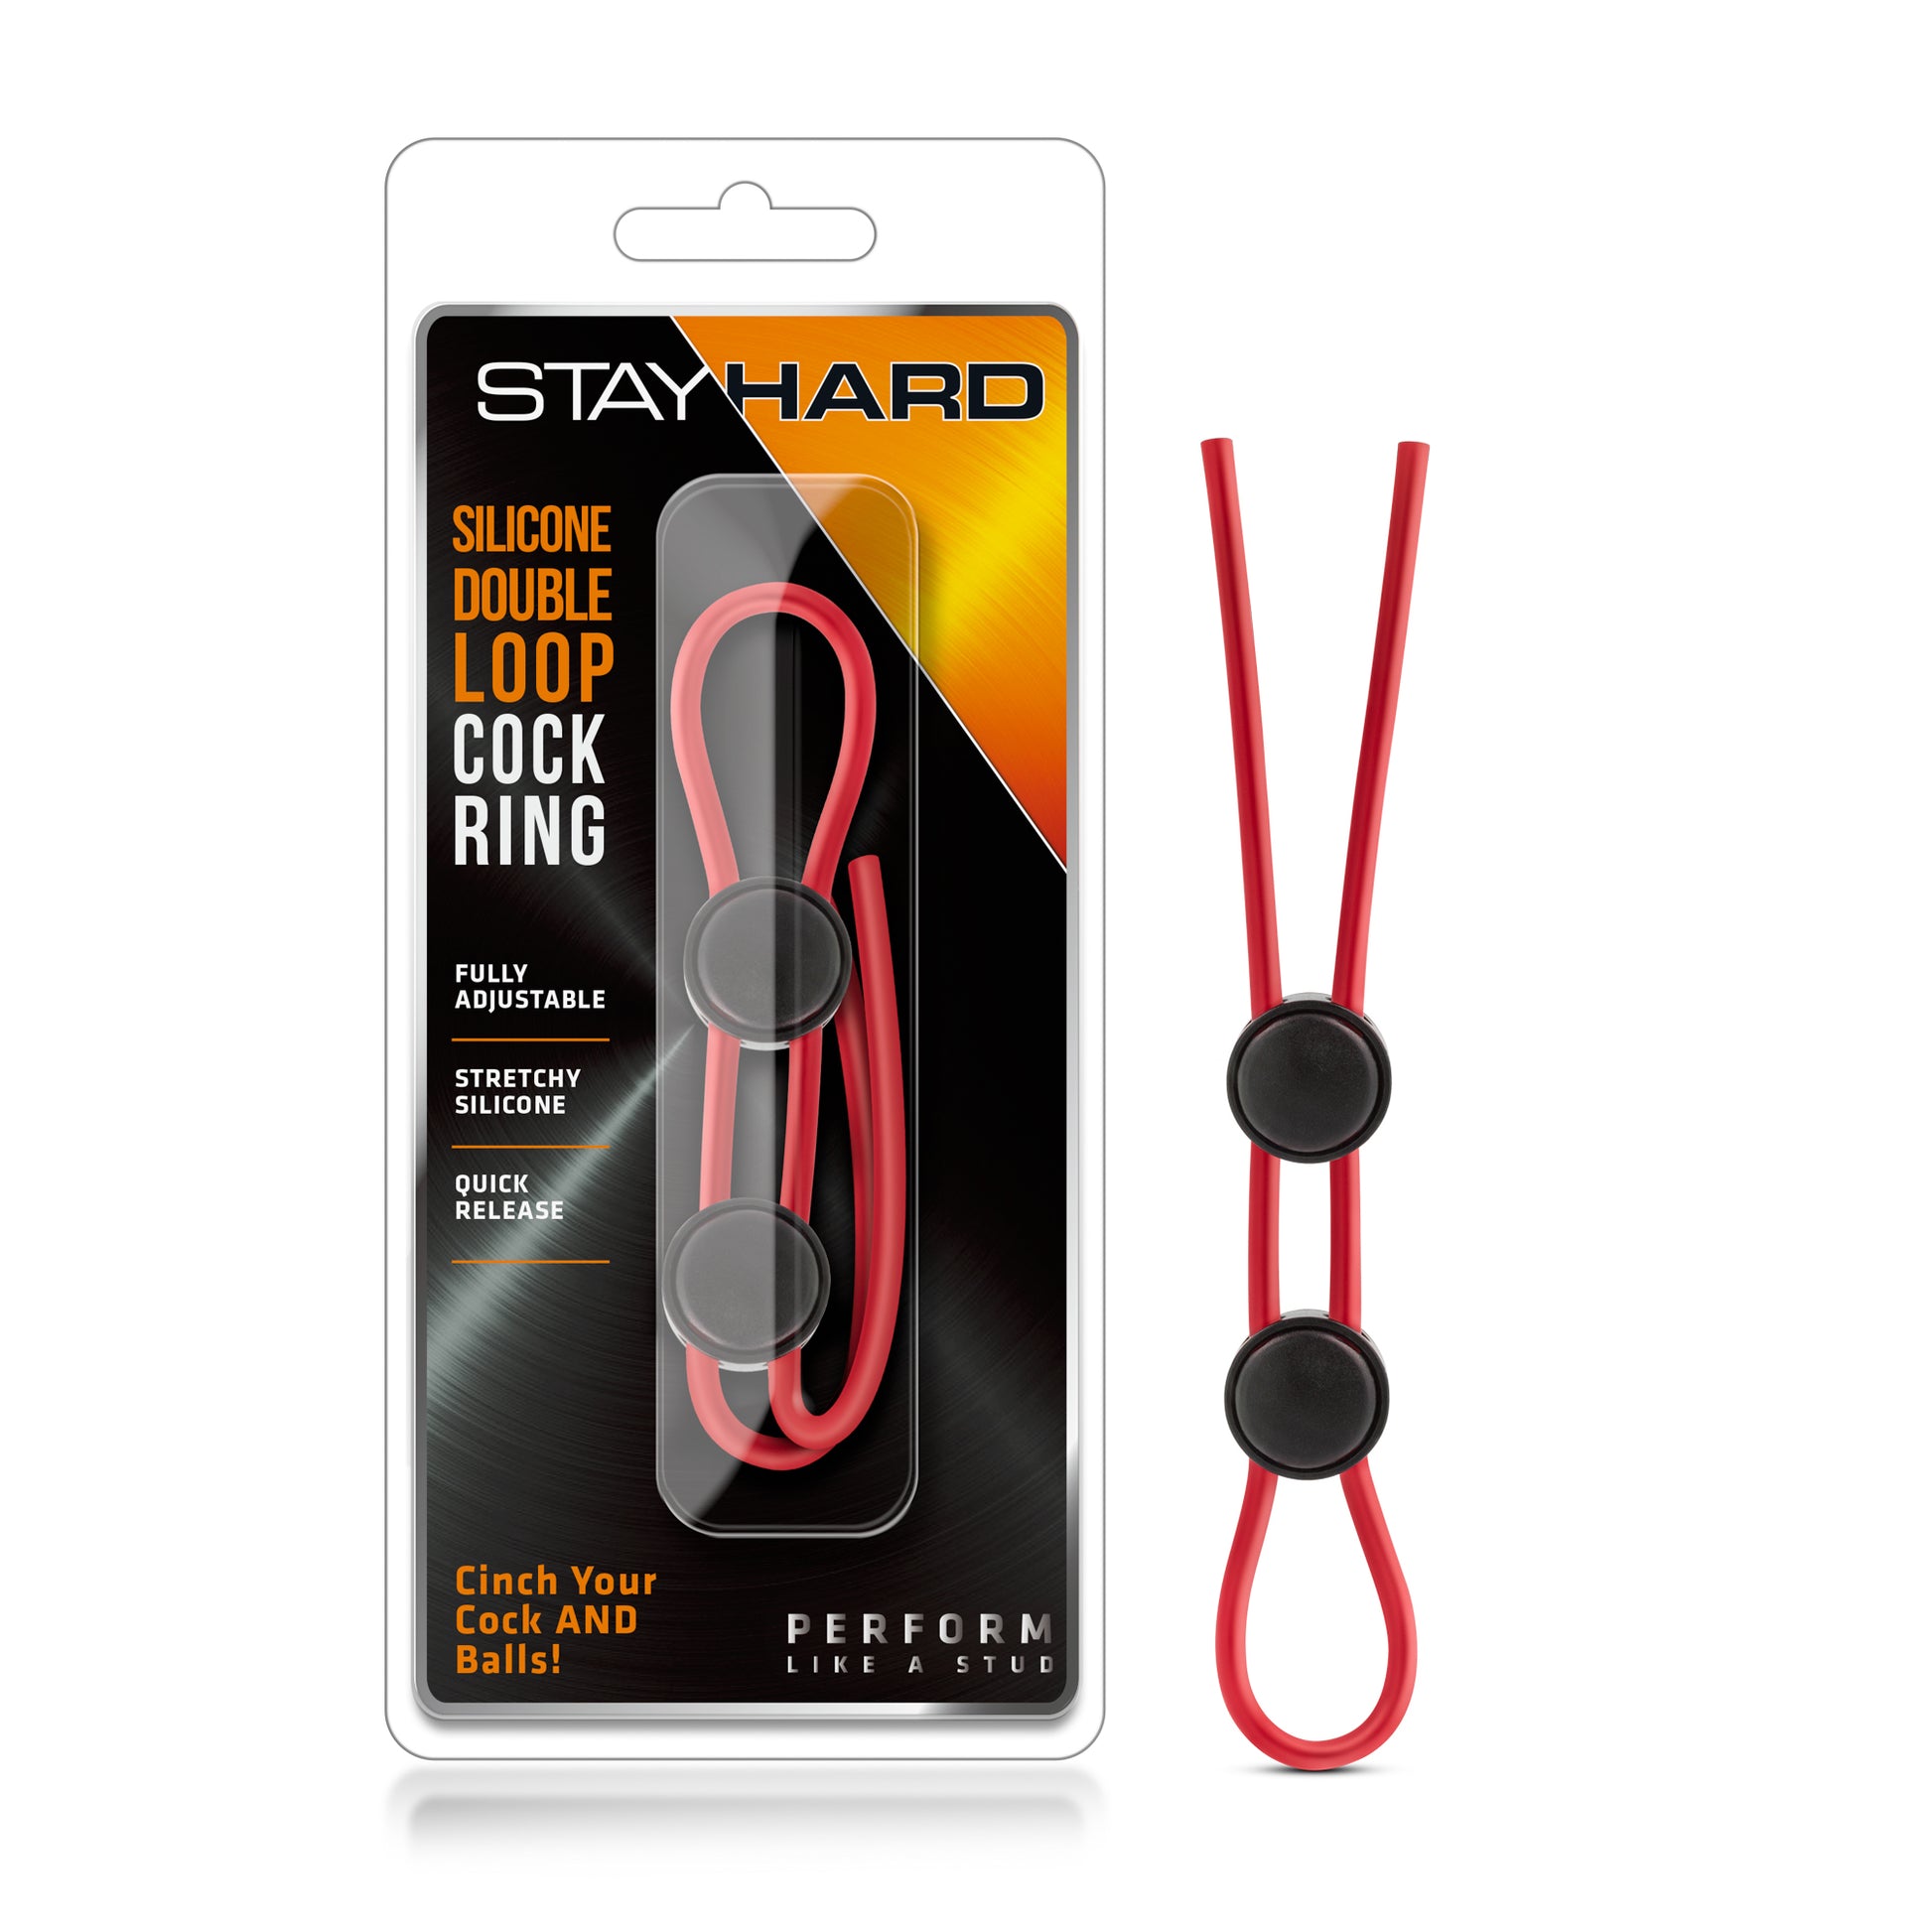 Stay Hard - Silicone Double Loop Cock Ring  - Red BL-32098